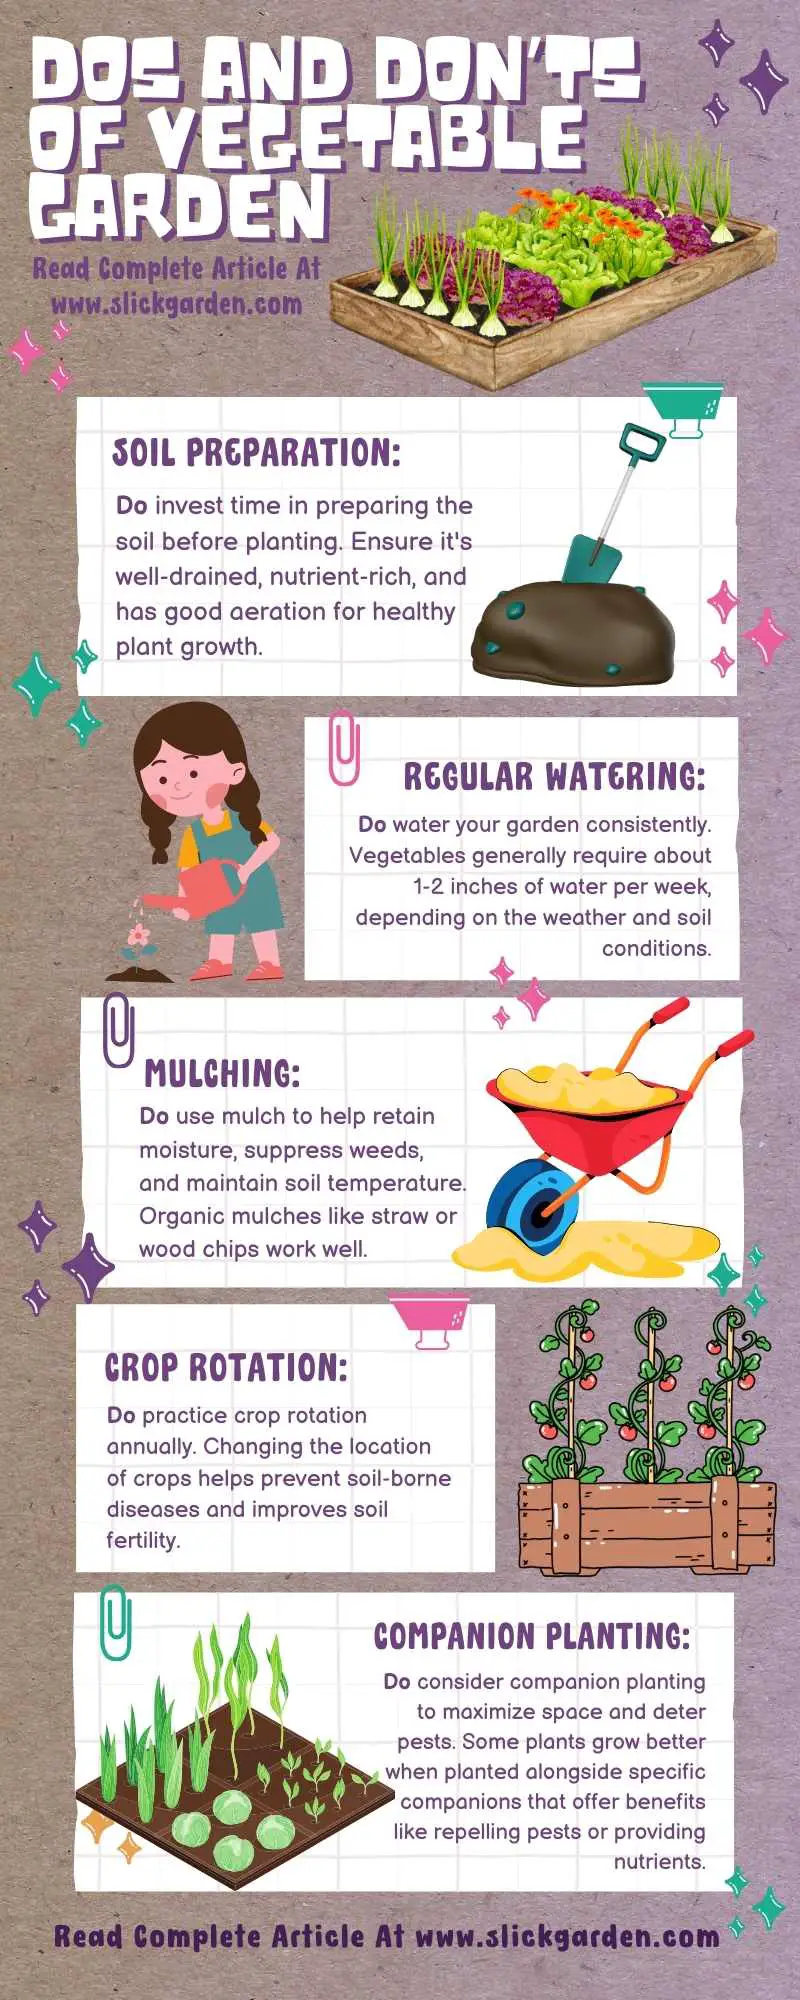 Dos And Don’ts Of Vegetable Garden infographic